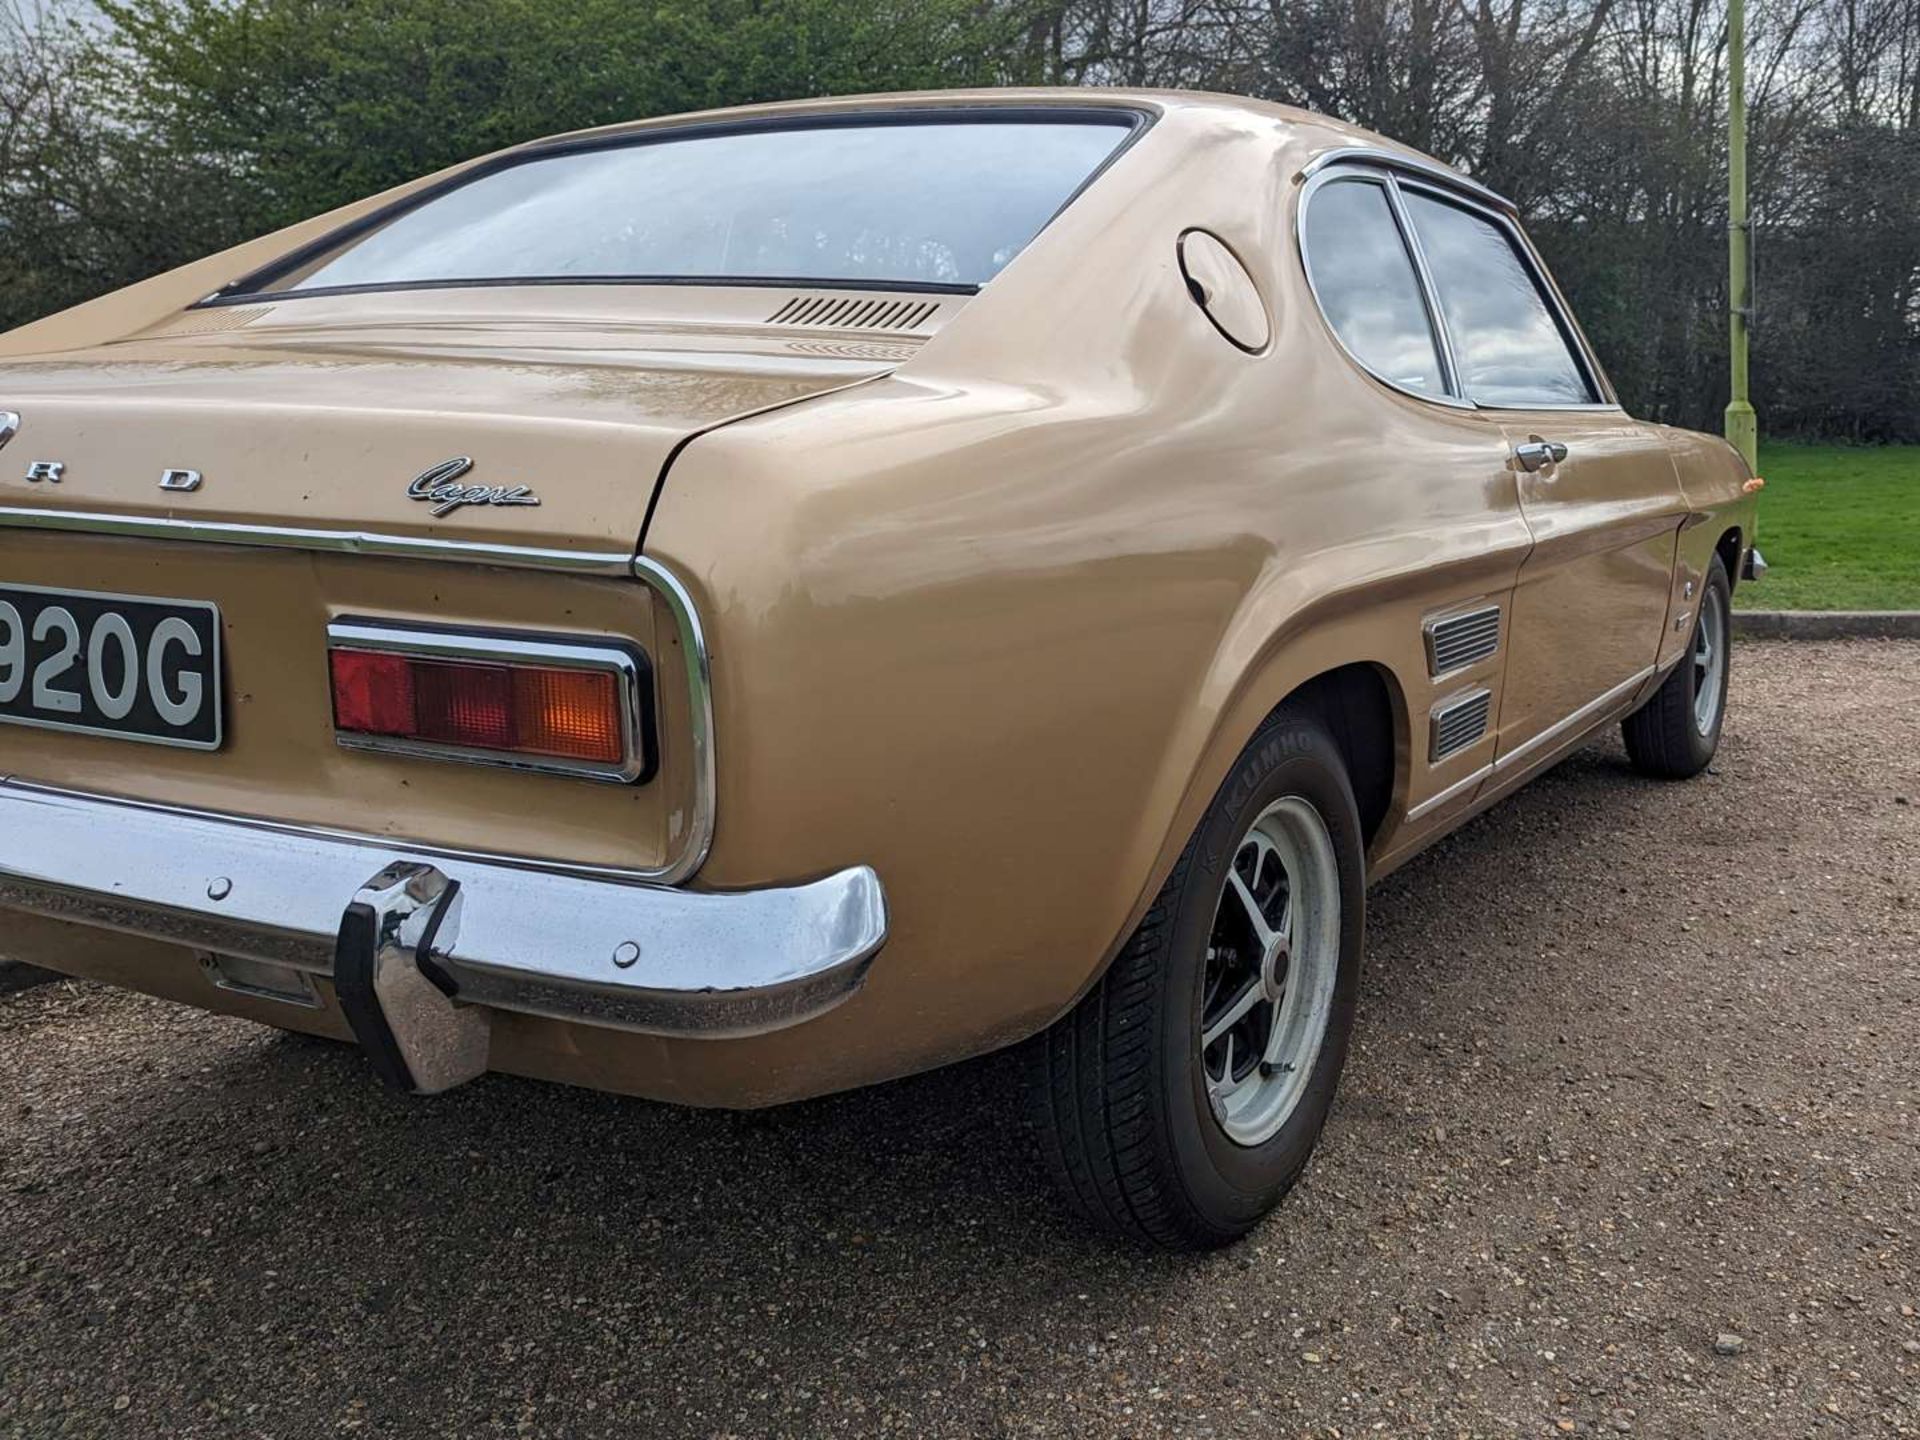 1969 FORD CAPRI 1600 GT LHD - Image 10 of 26